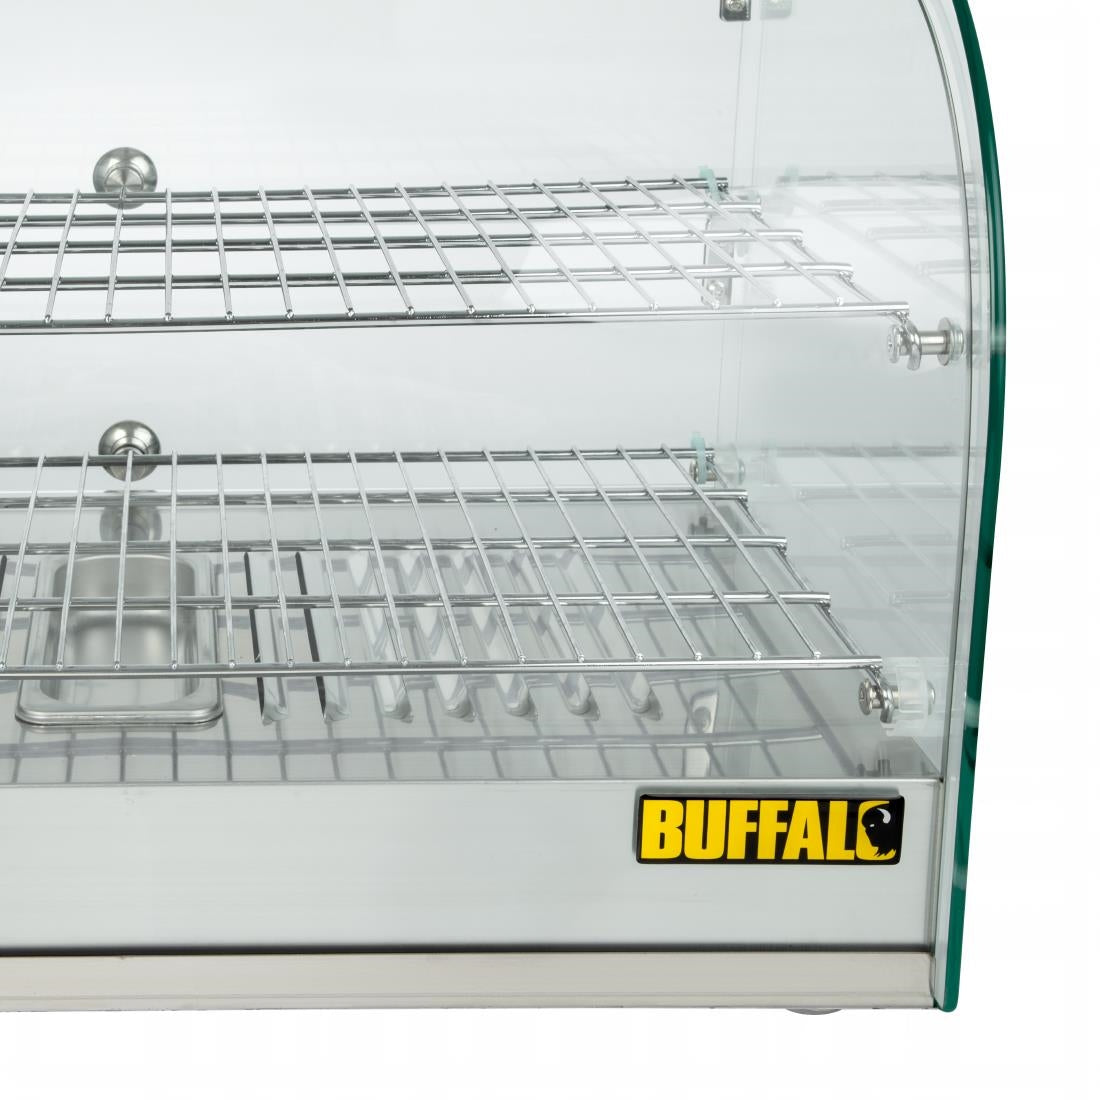 Buffalo Countertop Heated Food Display 554mm JD Catering Equipment Solutions Ltd